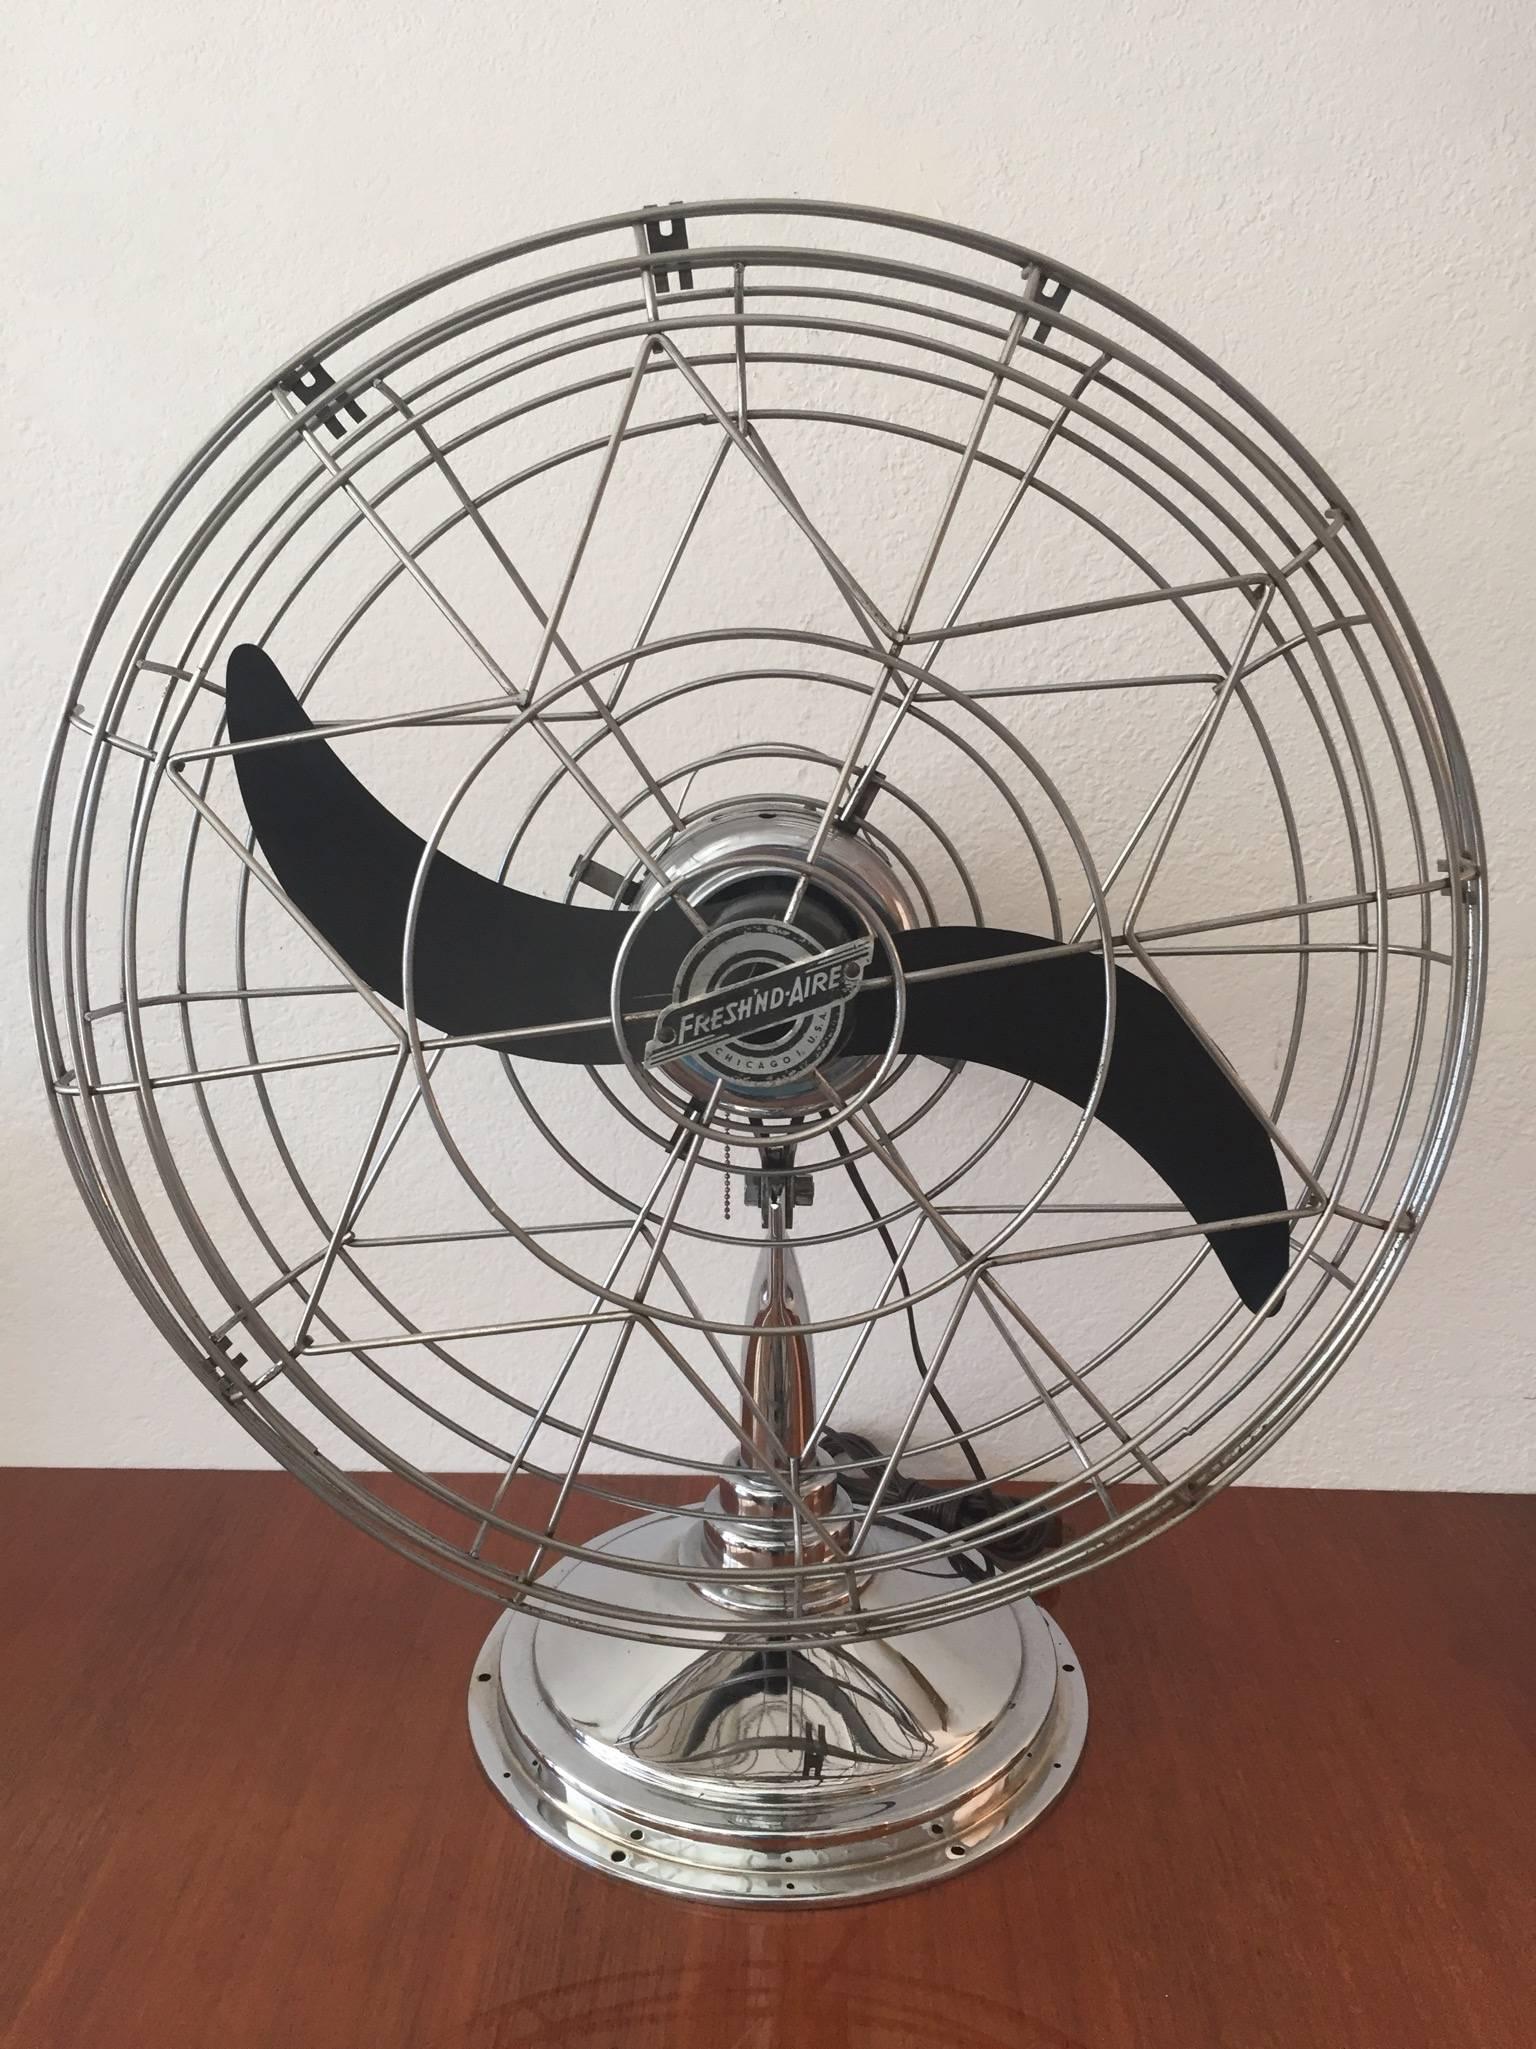 Vintage 1947 three-speed pull-chain chrome fan by General Electric named Fresh'nd Aire. Model no. 20 with 20 inch bakelite blade and chrome cage, motor cover and base.
Excellent restored condition.
Stats: No. 20-5994.
60 cycles.
130 watts.
115